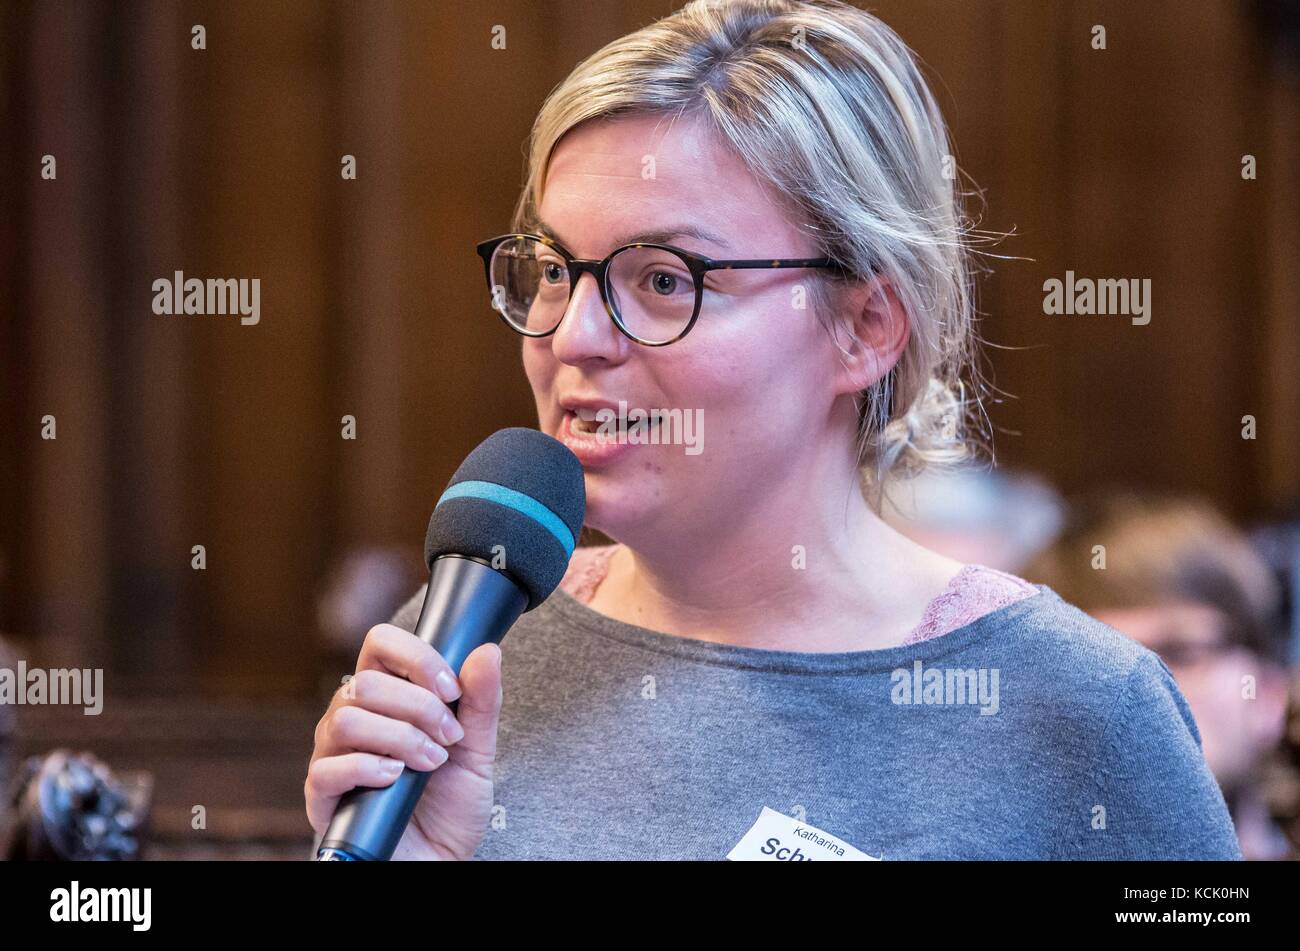 Munich, Bavaria, Germany. 6th Oct, 2017. Katharina Schulz of the Bavarian Landtag. The Munich Fachstelle fuer Demokratie (Office for Democracy) held a meeting with experts on the topic of the Olympia Einkaufszentrum (OEZ) Shooting in July 2016, which brought Munich to a standstill. A March 2017 report by the Bavarian Landeskriminalamt (Crime Office) deemed the act a case of mental illness due to bullying, despite overwhelming evidence of right-wing terror. 18-year-old David S., the deceased shooter, purchased the pistol from a neo-nazi in the Dark Web, idolized Hitler and Anders Breivik Stock Photo